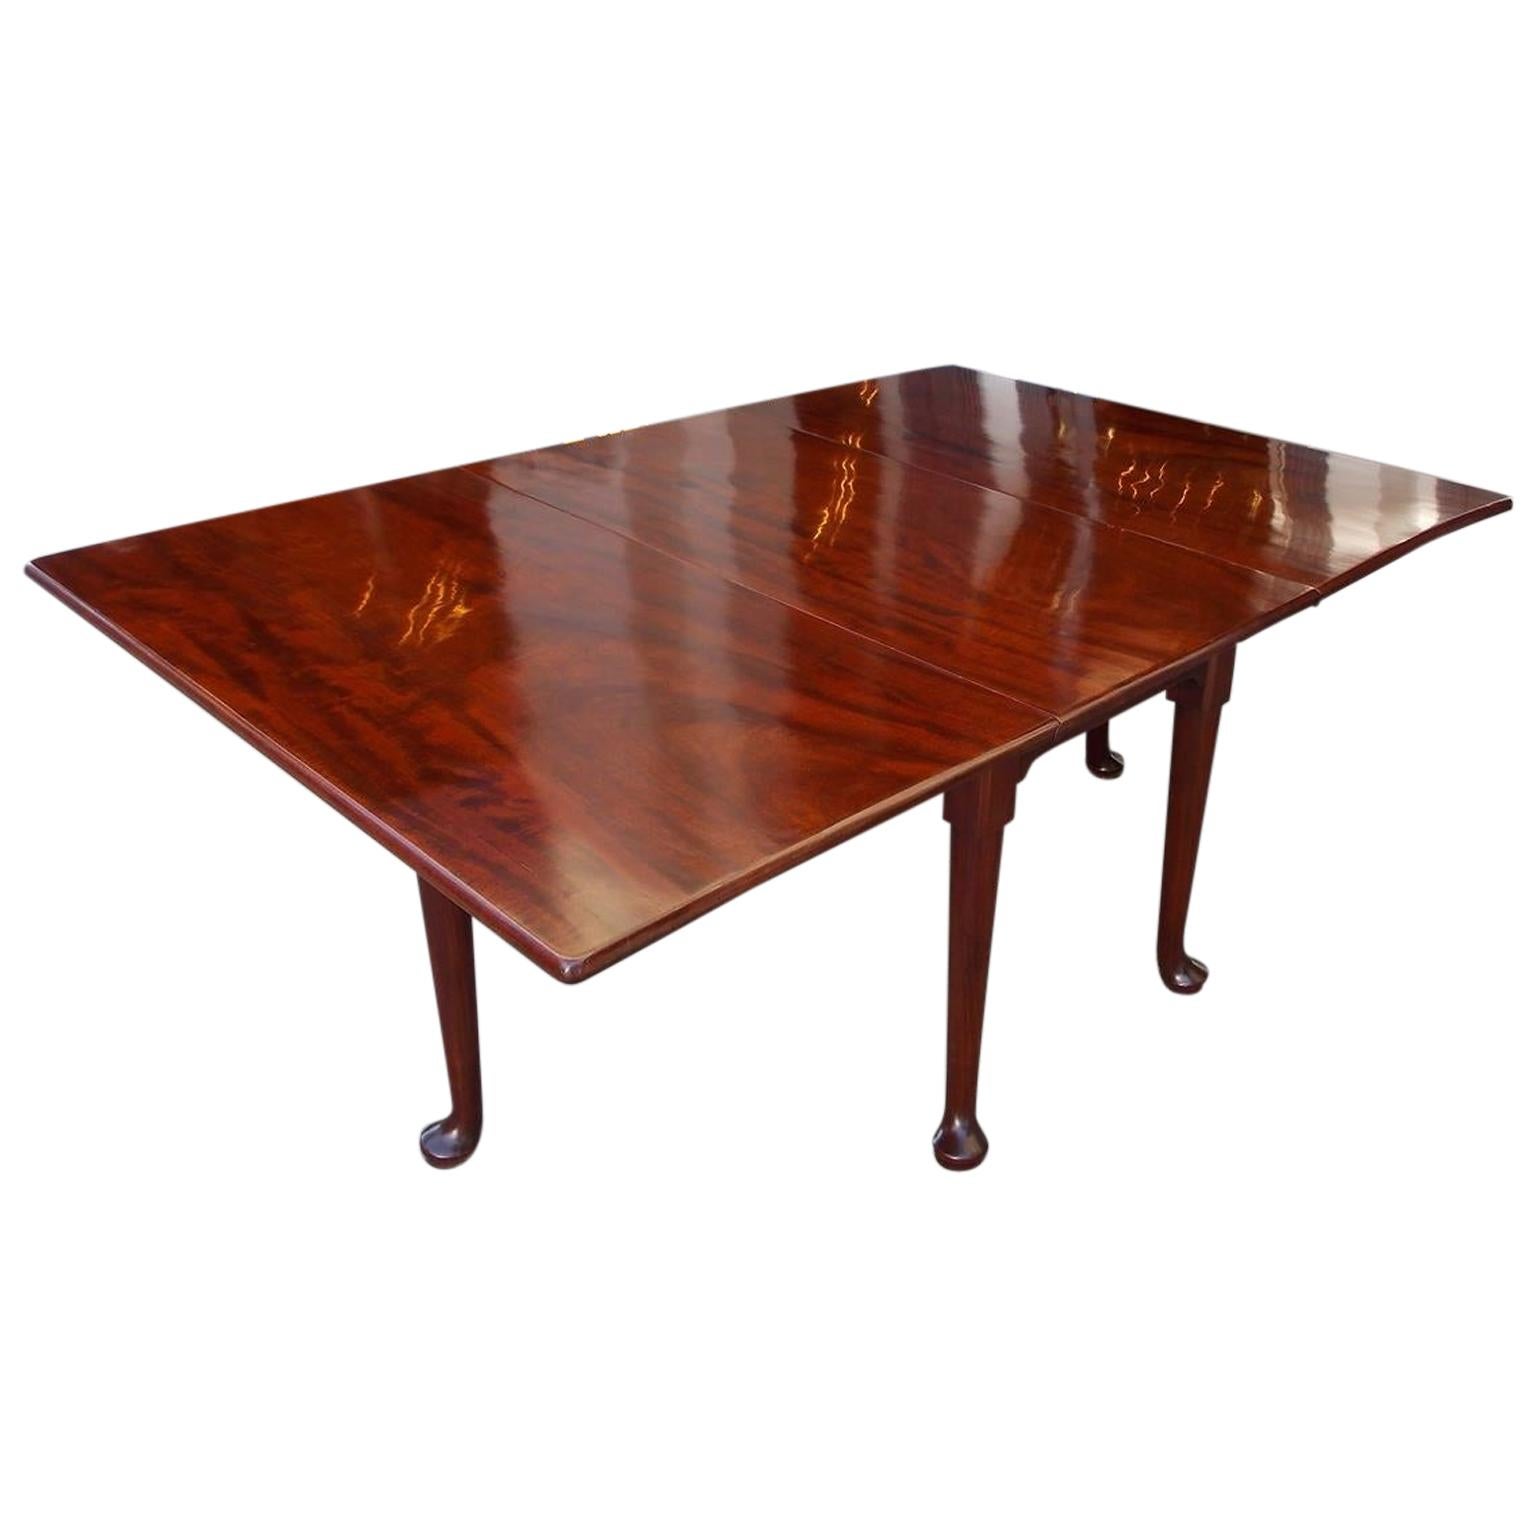 English Queen Anne Cuban Mahogany Drop Leaf Dining Table with Pad Feet, C. 1730 For Sale